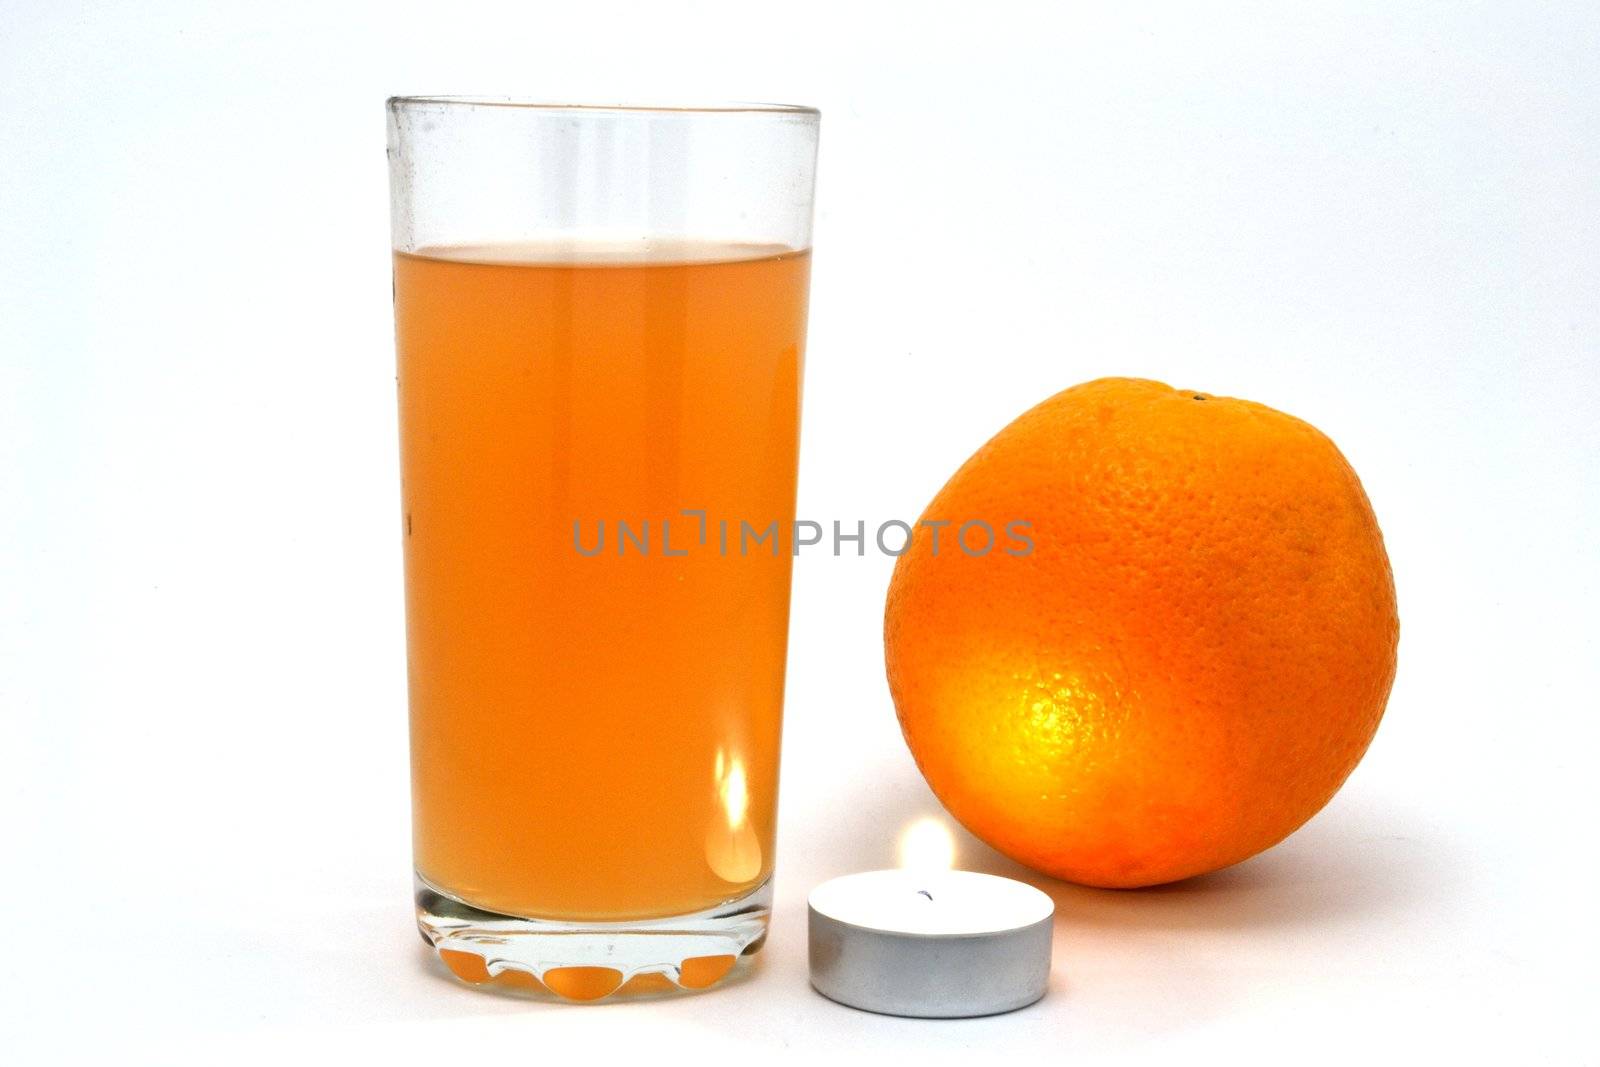 The glass full of juice and the orange over white background